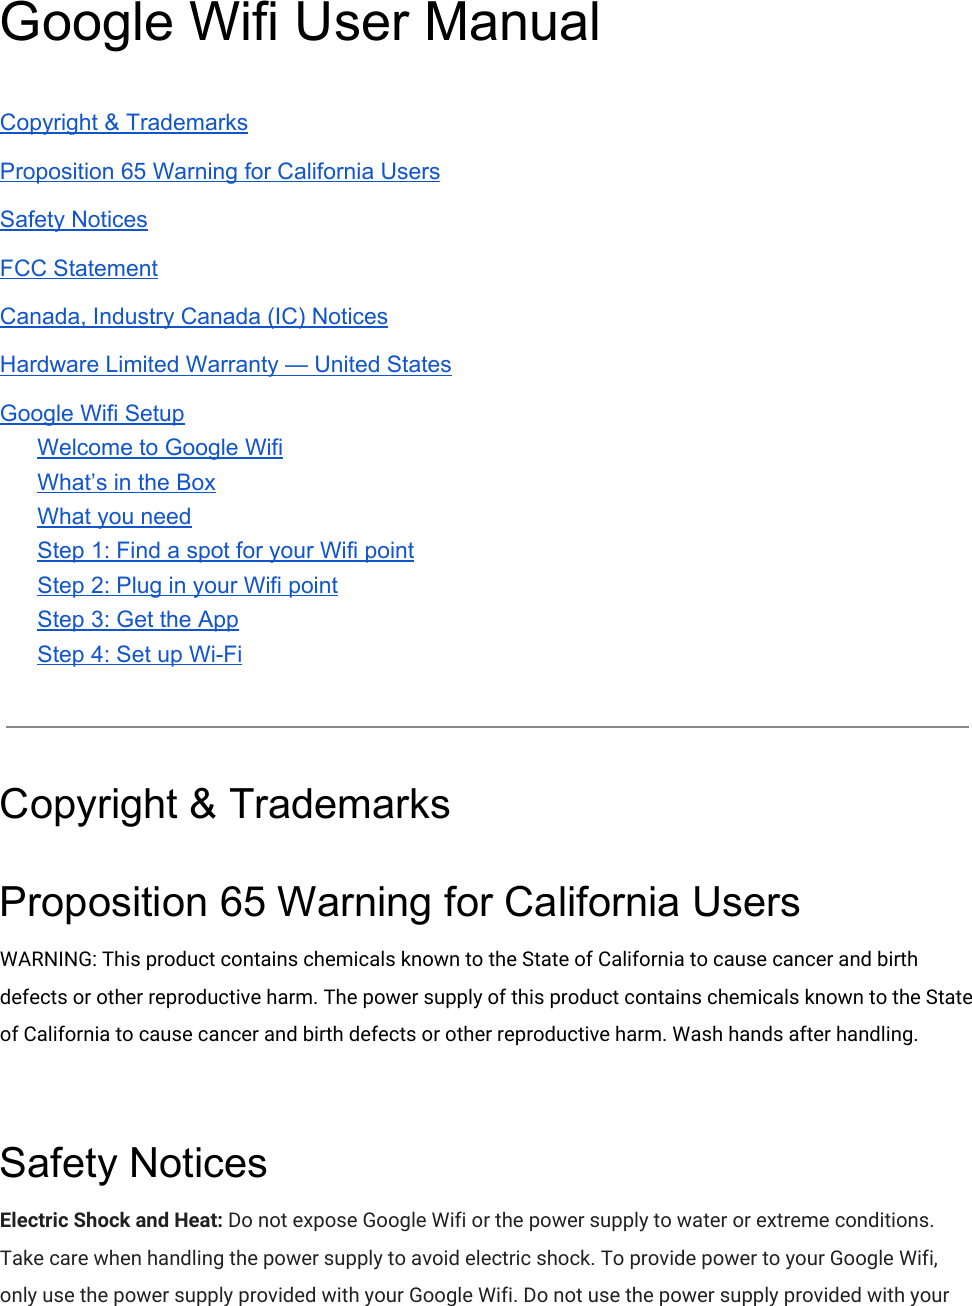 Google Wifi User Manual  Copyright &amp; Trademarks Proposition 65 Warning for California Users Safety Notices FCC Statement Canada, Industry Canada (IC) Notices Hardware Limited Warranty — United States Google Wifi Setup Welcome to Google Wifi What’s in the Box What you need Step 1: Find a spot for your Wifi point Step 2: Plug in your Wifi point Step 3: Get the App Step 4: Set up Wi-Fi   Copyright &amp; Trademarks Proposition 65 Warning for California Users WARNING: This product contains chemicals known to the State of California to cause cancer and birth defects or other reproductive harm. The power supply of this product contains chemicals known to the State of California to cause cancer and birth defects or other reproductive harm. Wash hands after handling.  Safety Notices Electric Shock and Heat: Do not expose Google Wifi or the power supply to water or extreme conditions. Take care when handling the power supply to avoid electric shock. To provide power to your Google Wifi, only use the power supply provided with your Google Wifi. Do not use the power supply provided with your 